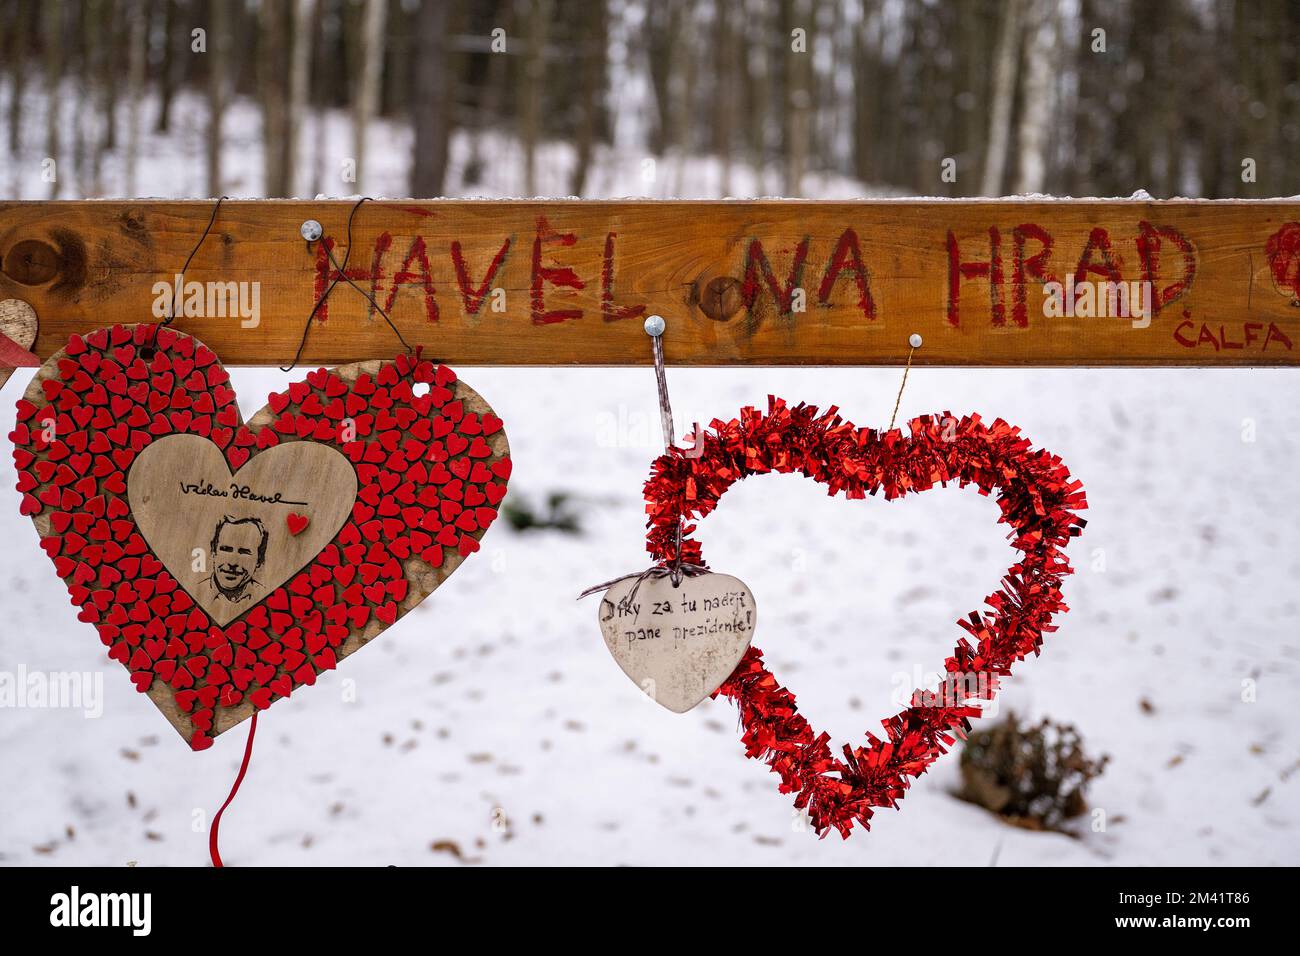 Hradecek, Czech Republic. 18th Dec, 2022. People came to place commemorative things and light candles to mark 11th anniversary of Vaclav Havel death at his countryside house in Hradecek, Czech Republic, on December 18, 2022. Credit: David Tanecek/CTK Photo/Alamy Live News Stock Photo